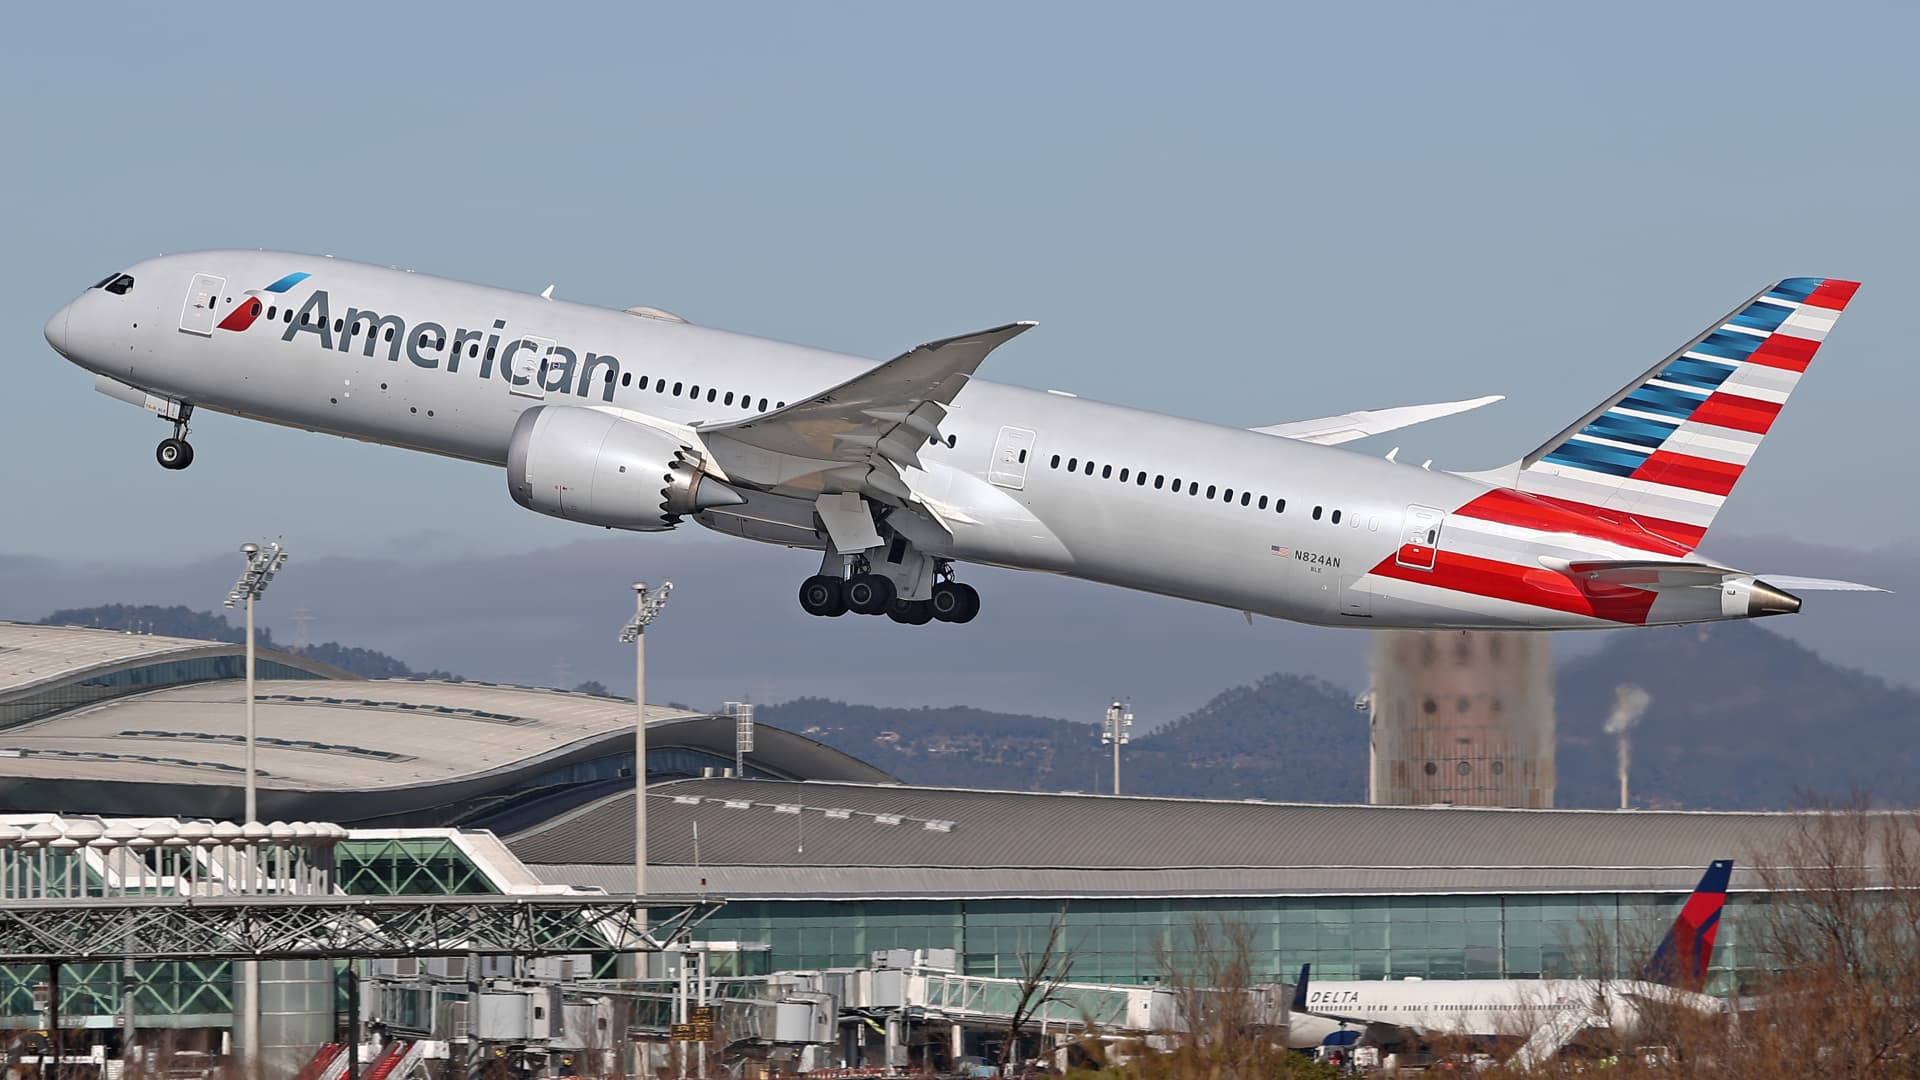 American Airlines is canceling a number of international flights due to Boeing delays